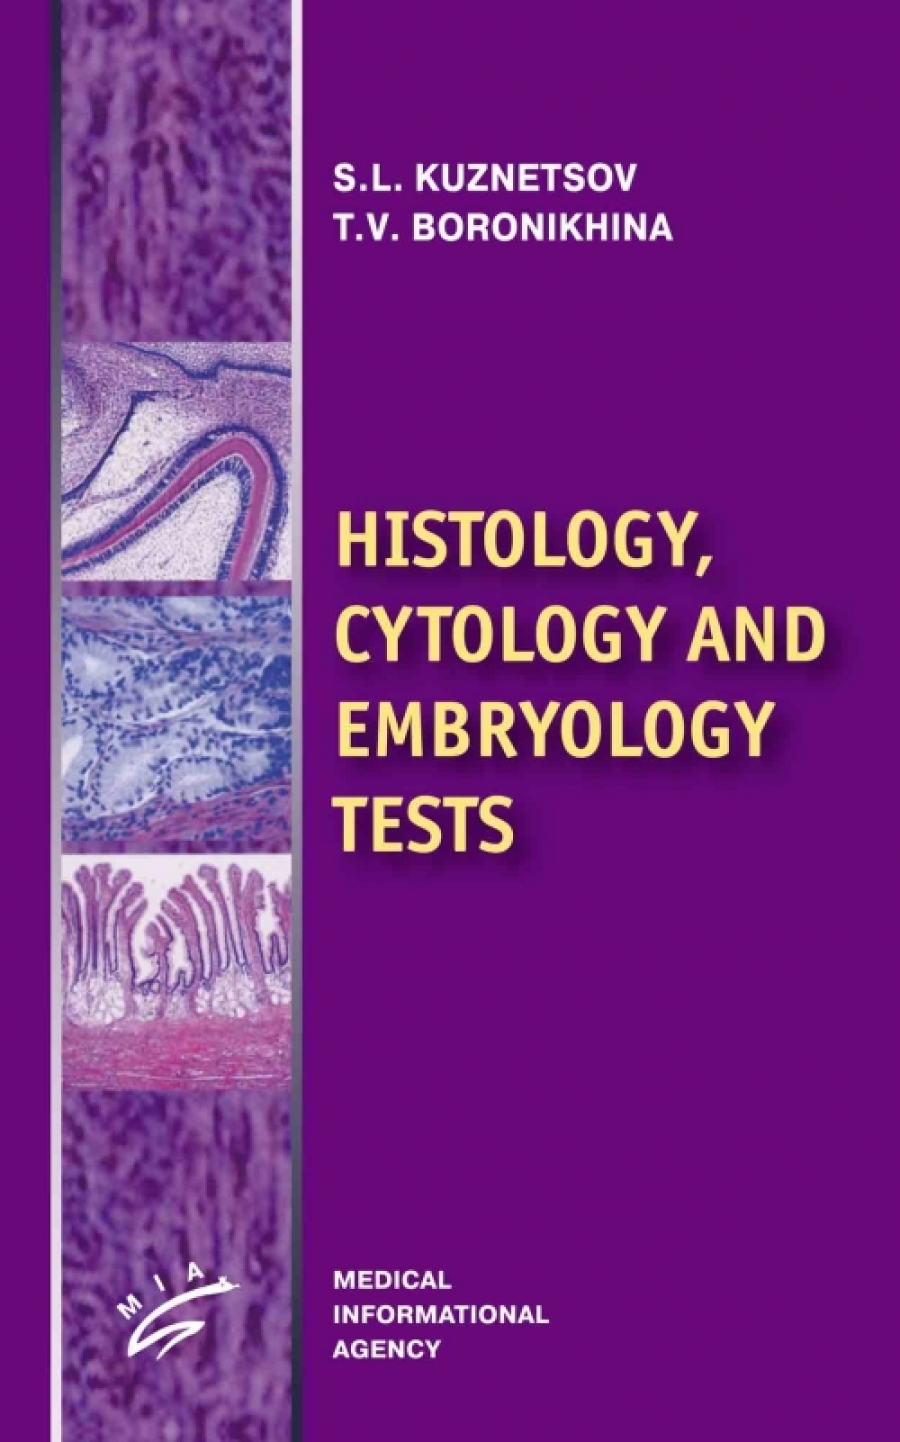  ..,  .. Histology, cytology and embryology tests 